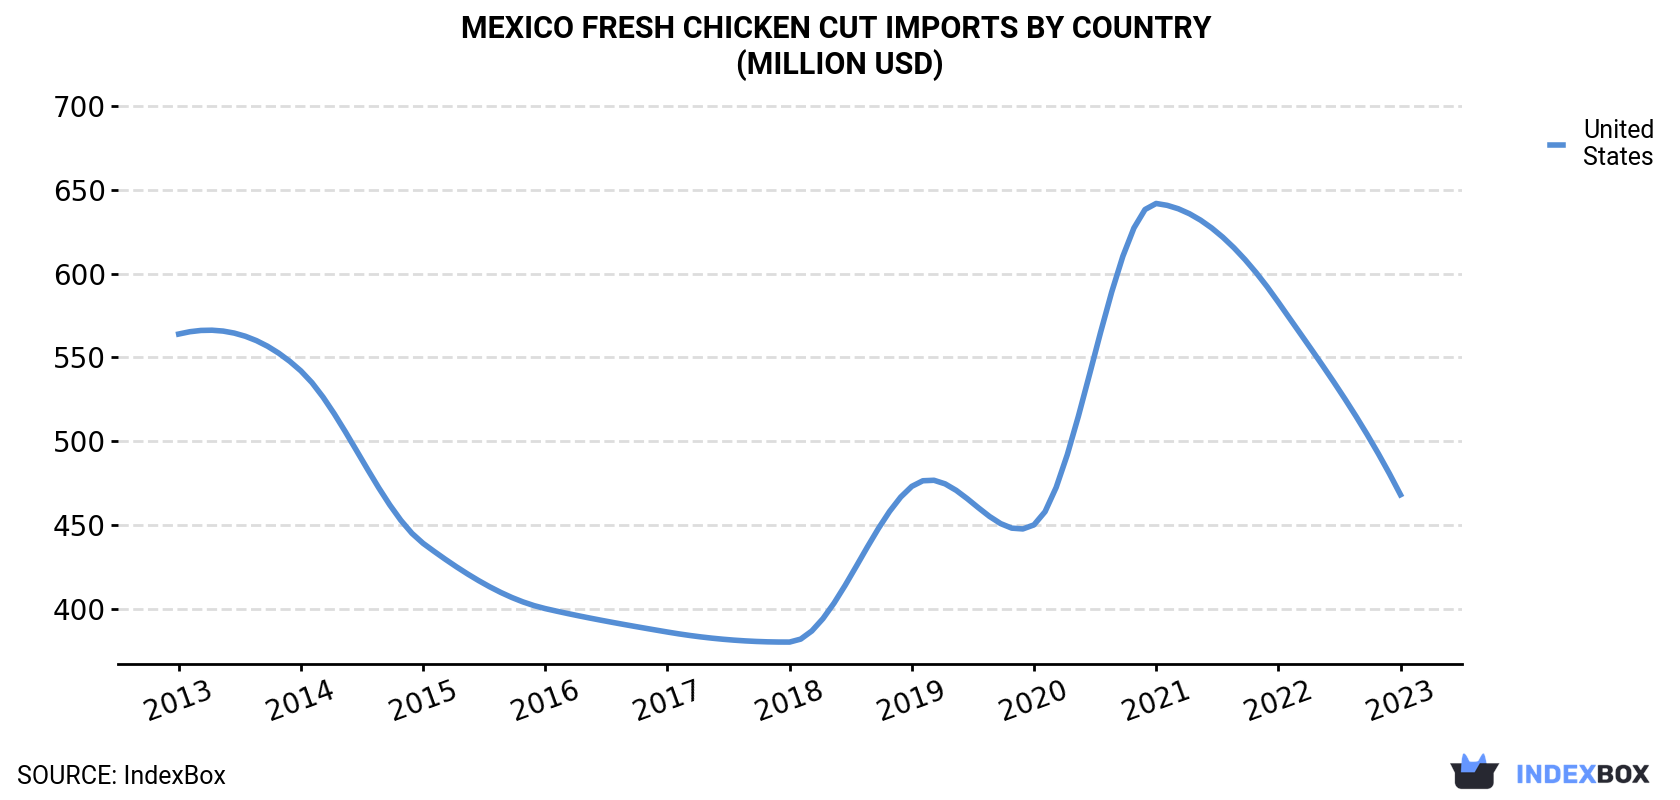 Mexico Fresh Chicken Cut Imports By Country (Million USD)